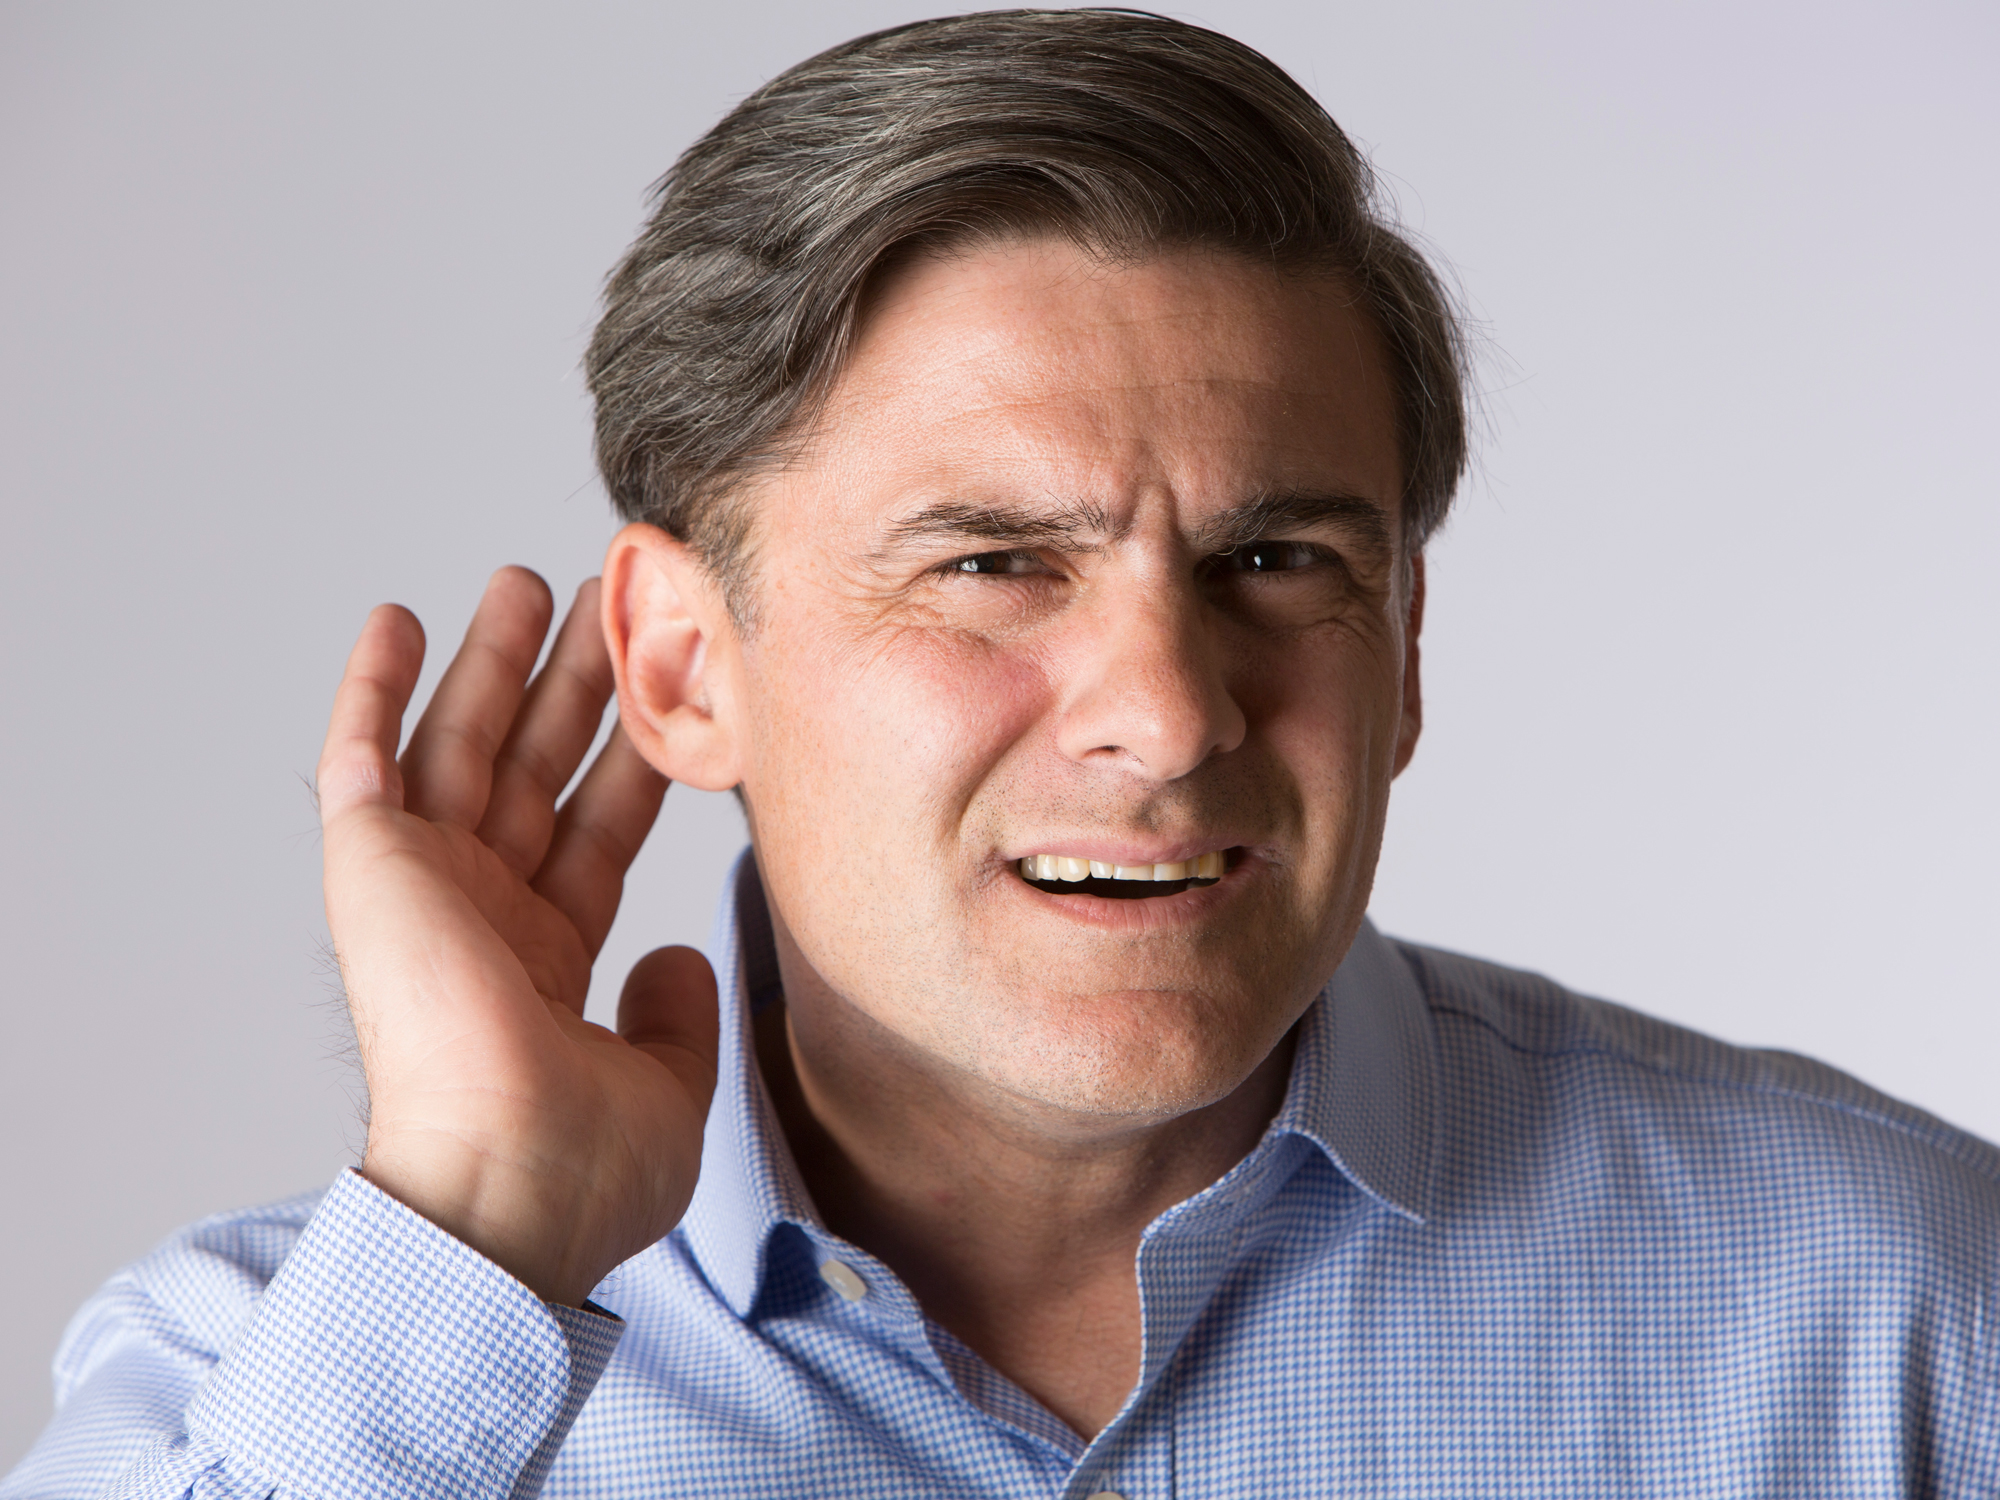 5 natural hearing loss remedies you’ll want to hear about